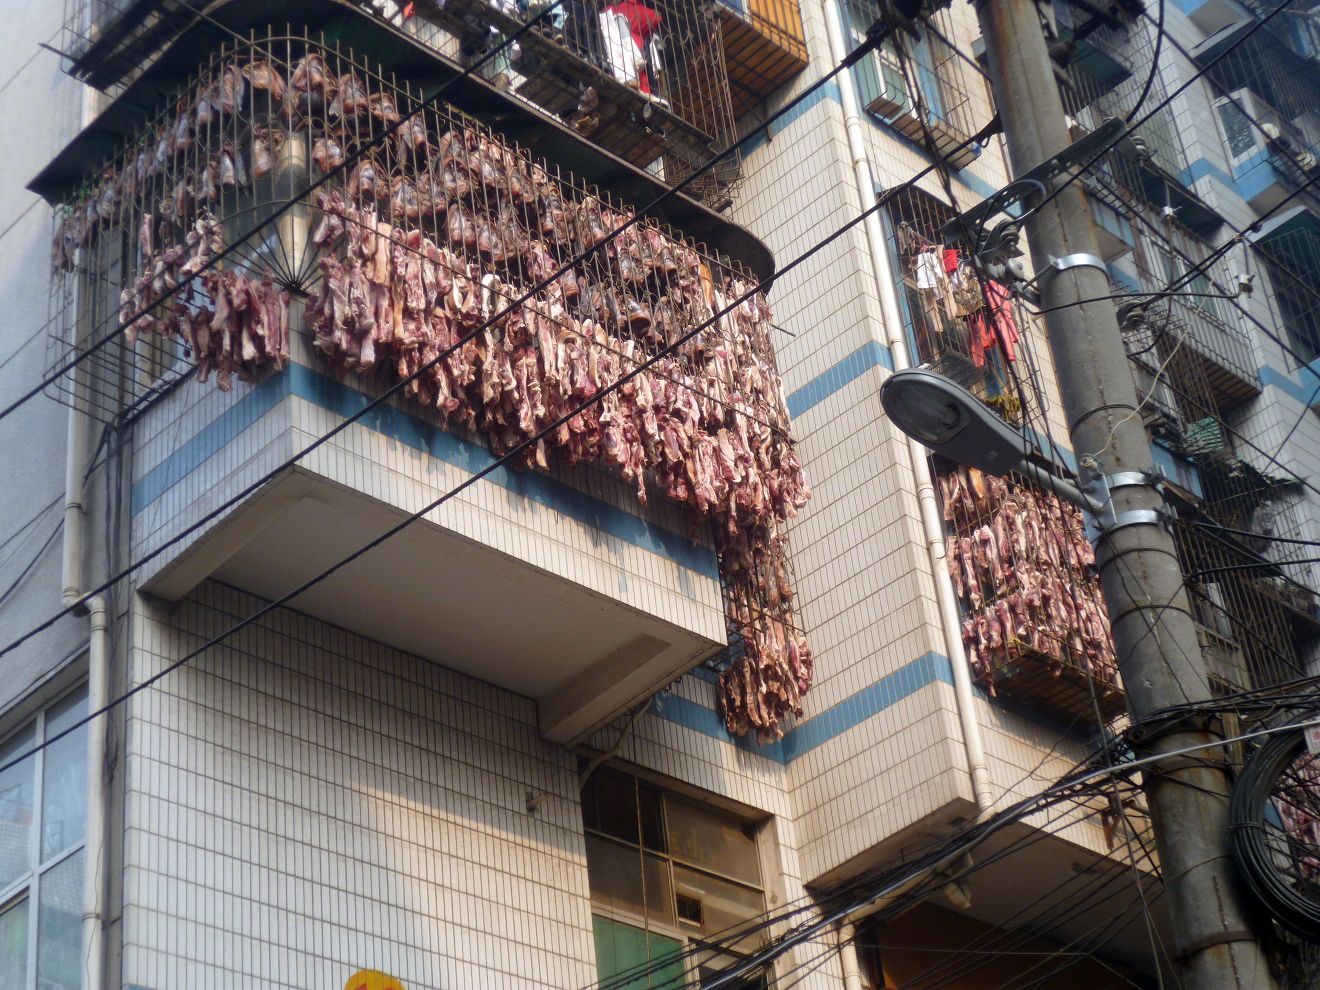 Bacon hangs to dry from a third-floor apartment window in Wuhan, China, Jan. 9, 2014.